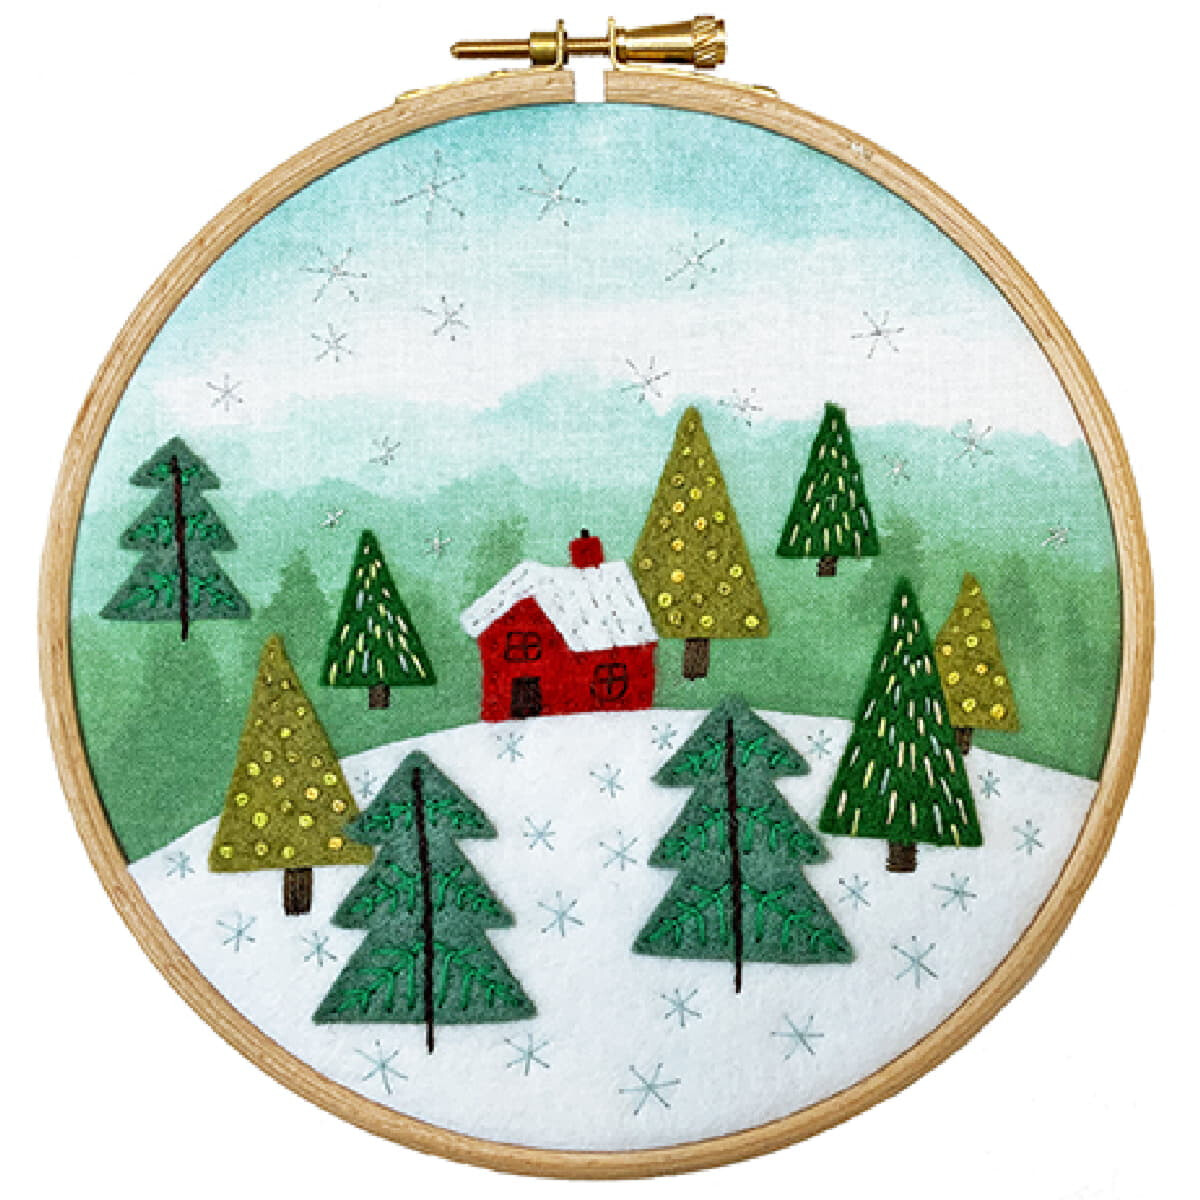 A round embroidery hoop shows a winter landscape with a...